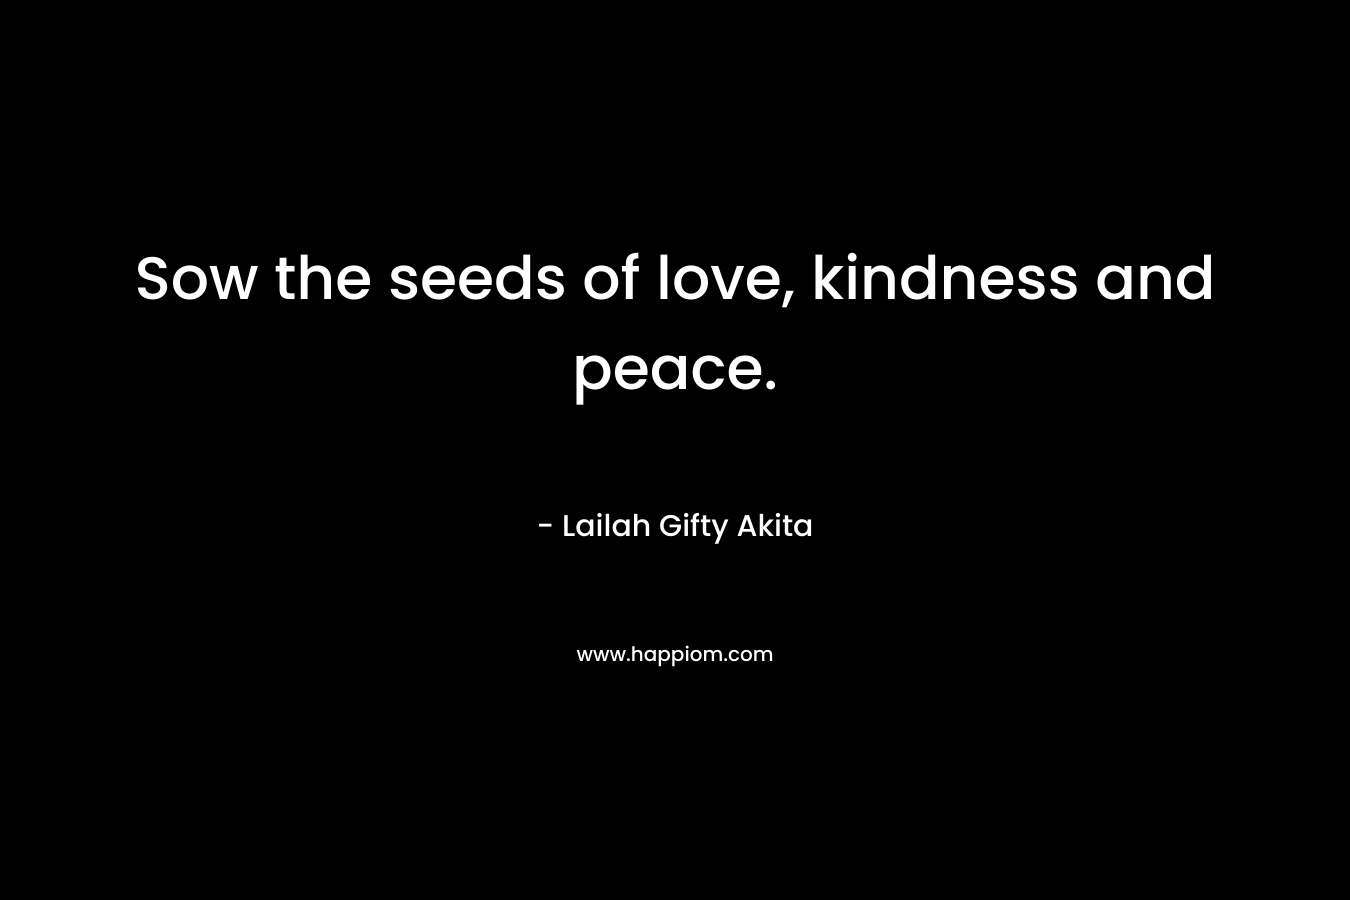 Sow the seeds of love, kindness and peace.